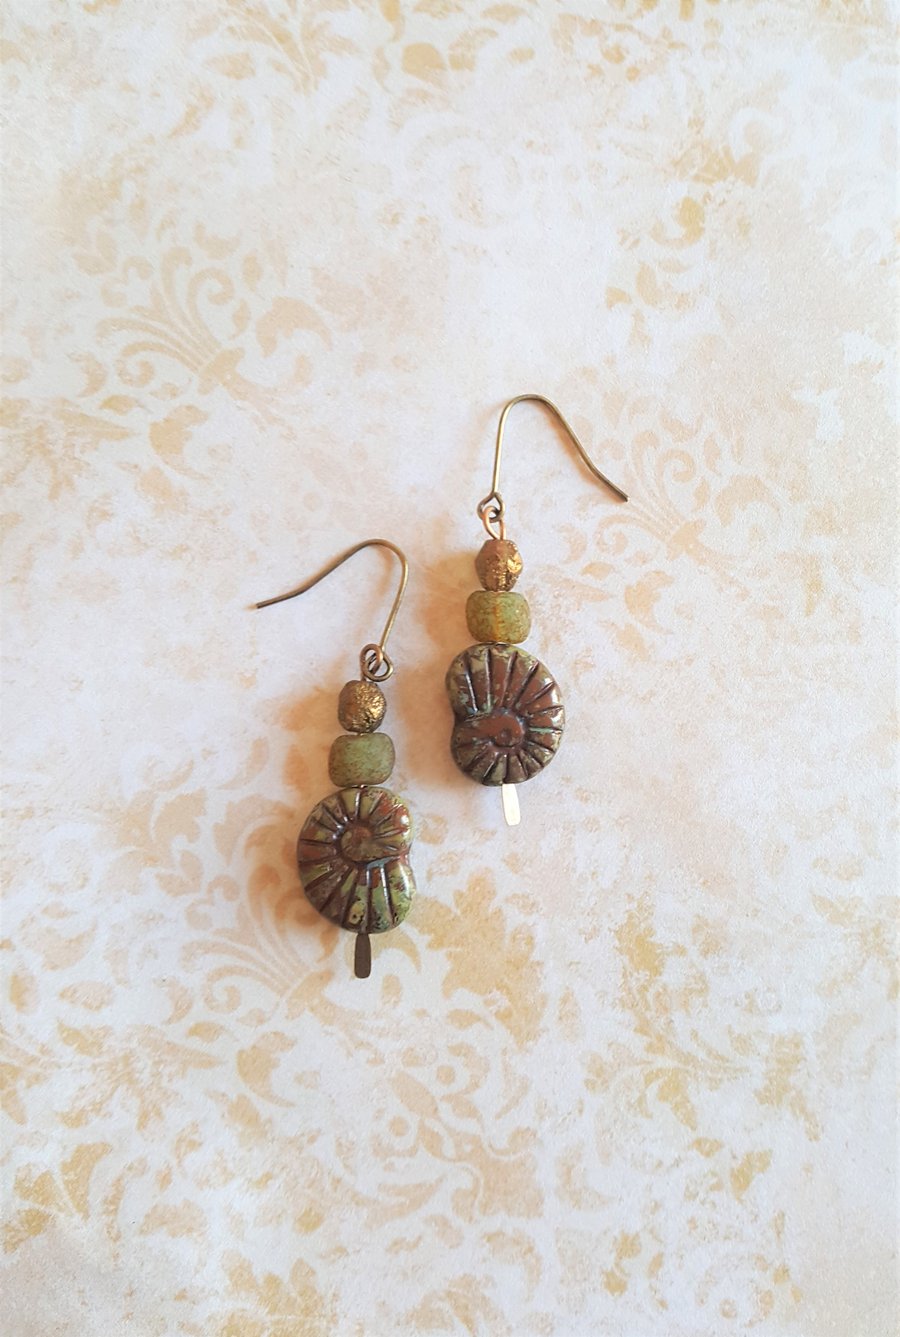 Rustic Fossil Earrings  Picasso Czech Glass